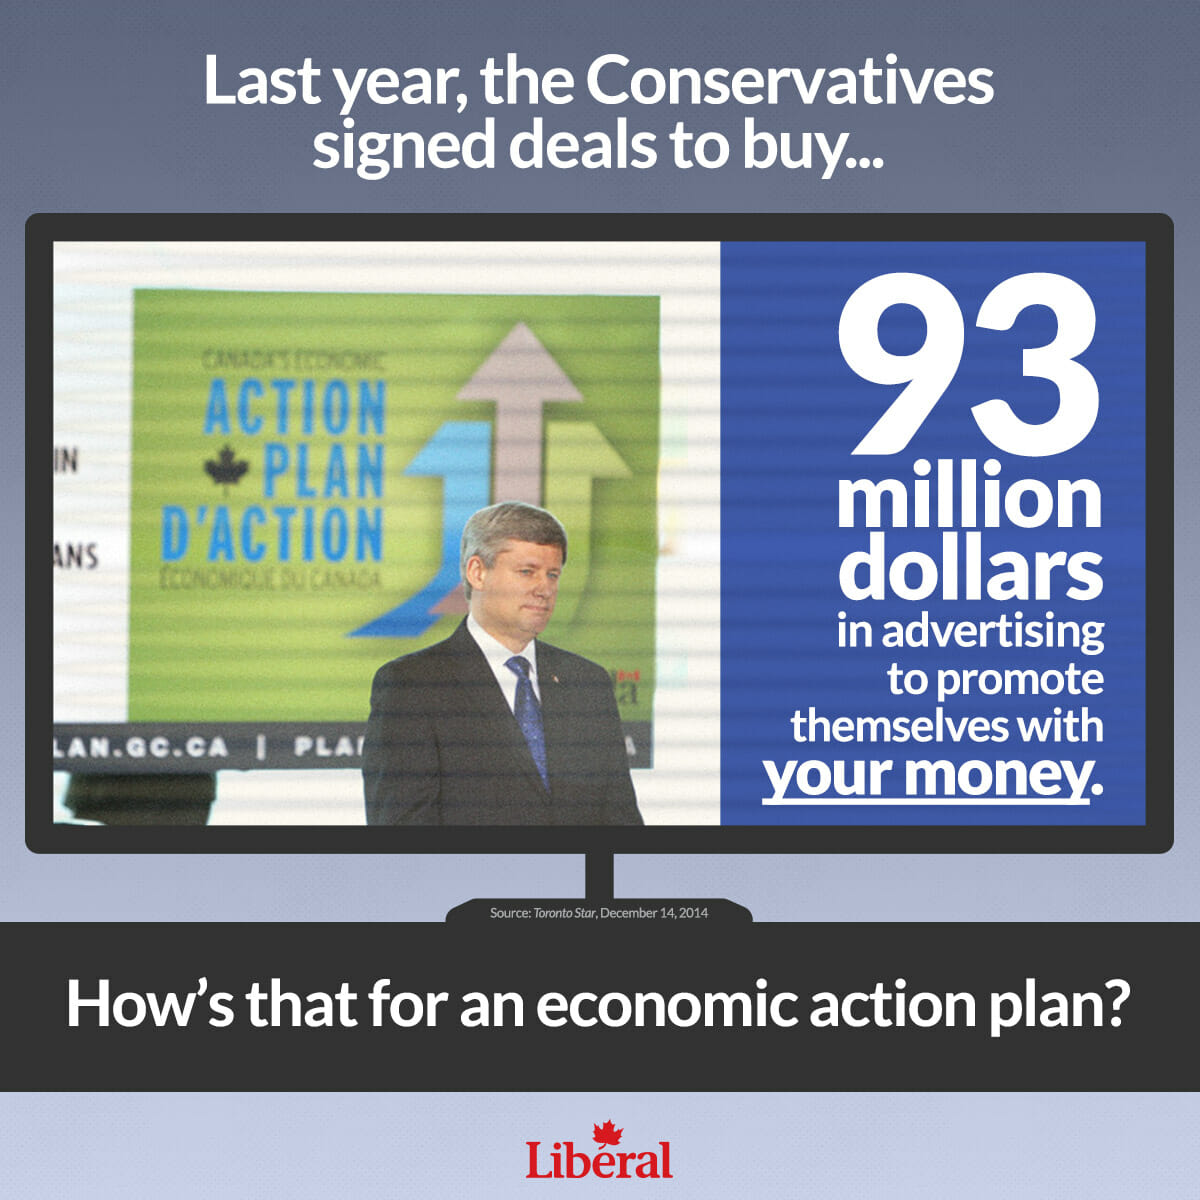 Last year, the Conservatives signed deals to buy 93 million dollars in advertising to promote themselves with your money. How's that for an economic action plan?